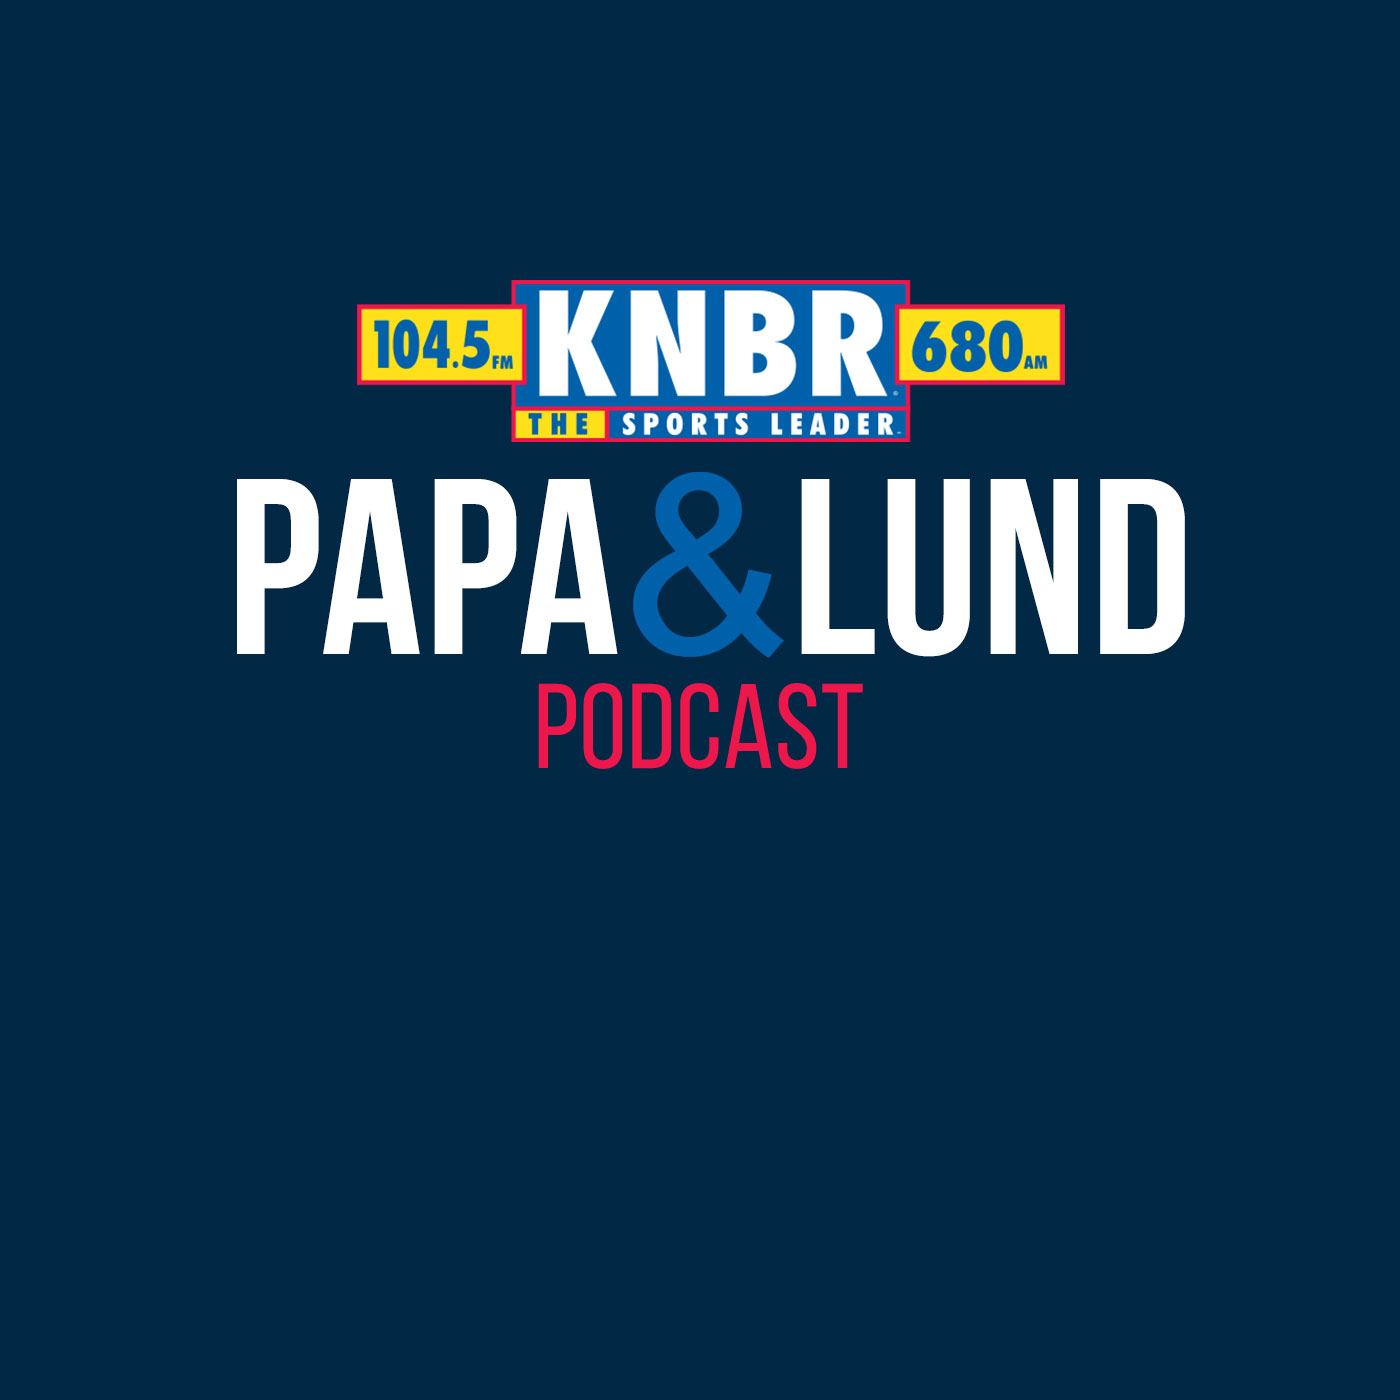 11-30 Brian Anderson of NBA on TNT joins Papa & Lund: The streaking Warriors are good for the league